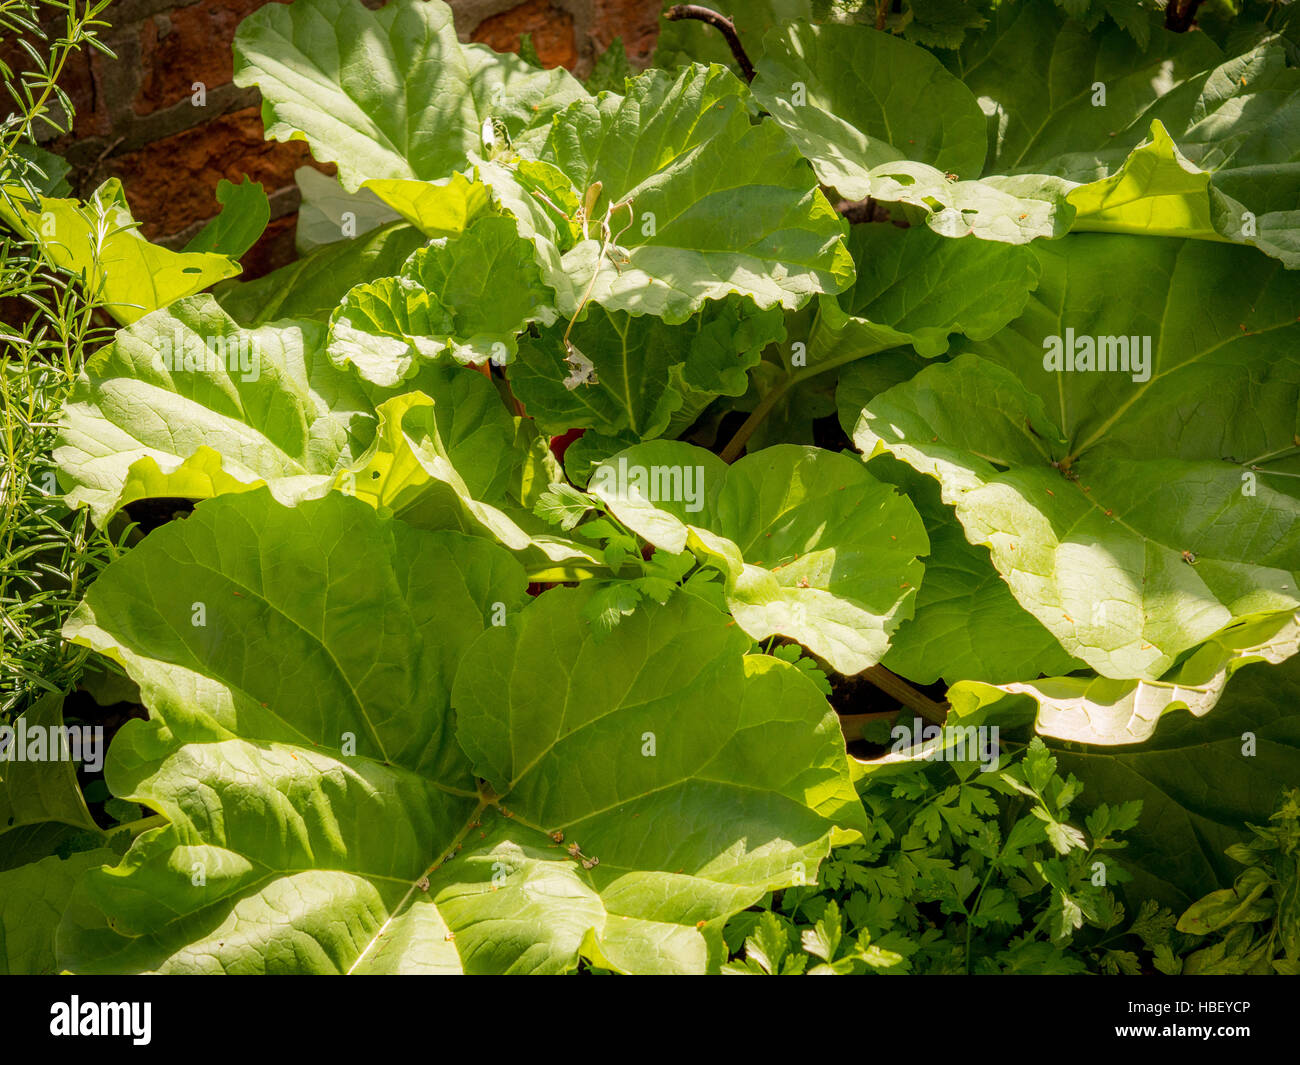 Rhubarb growing in vegetable patch Stock Photo